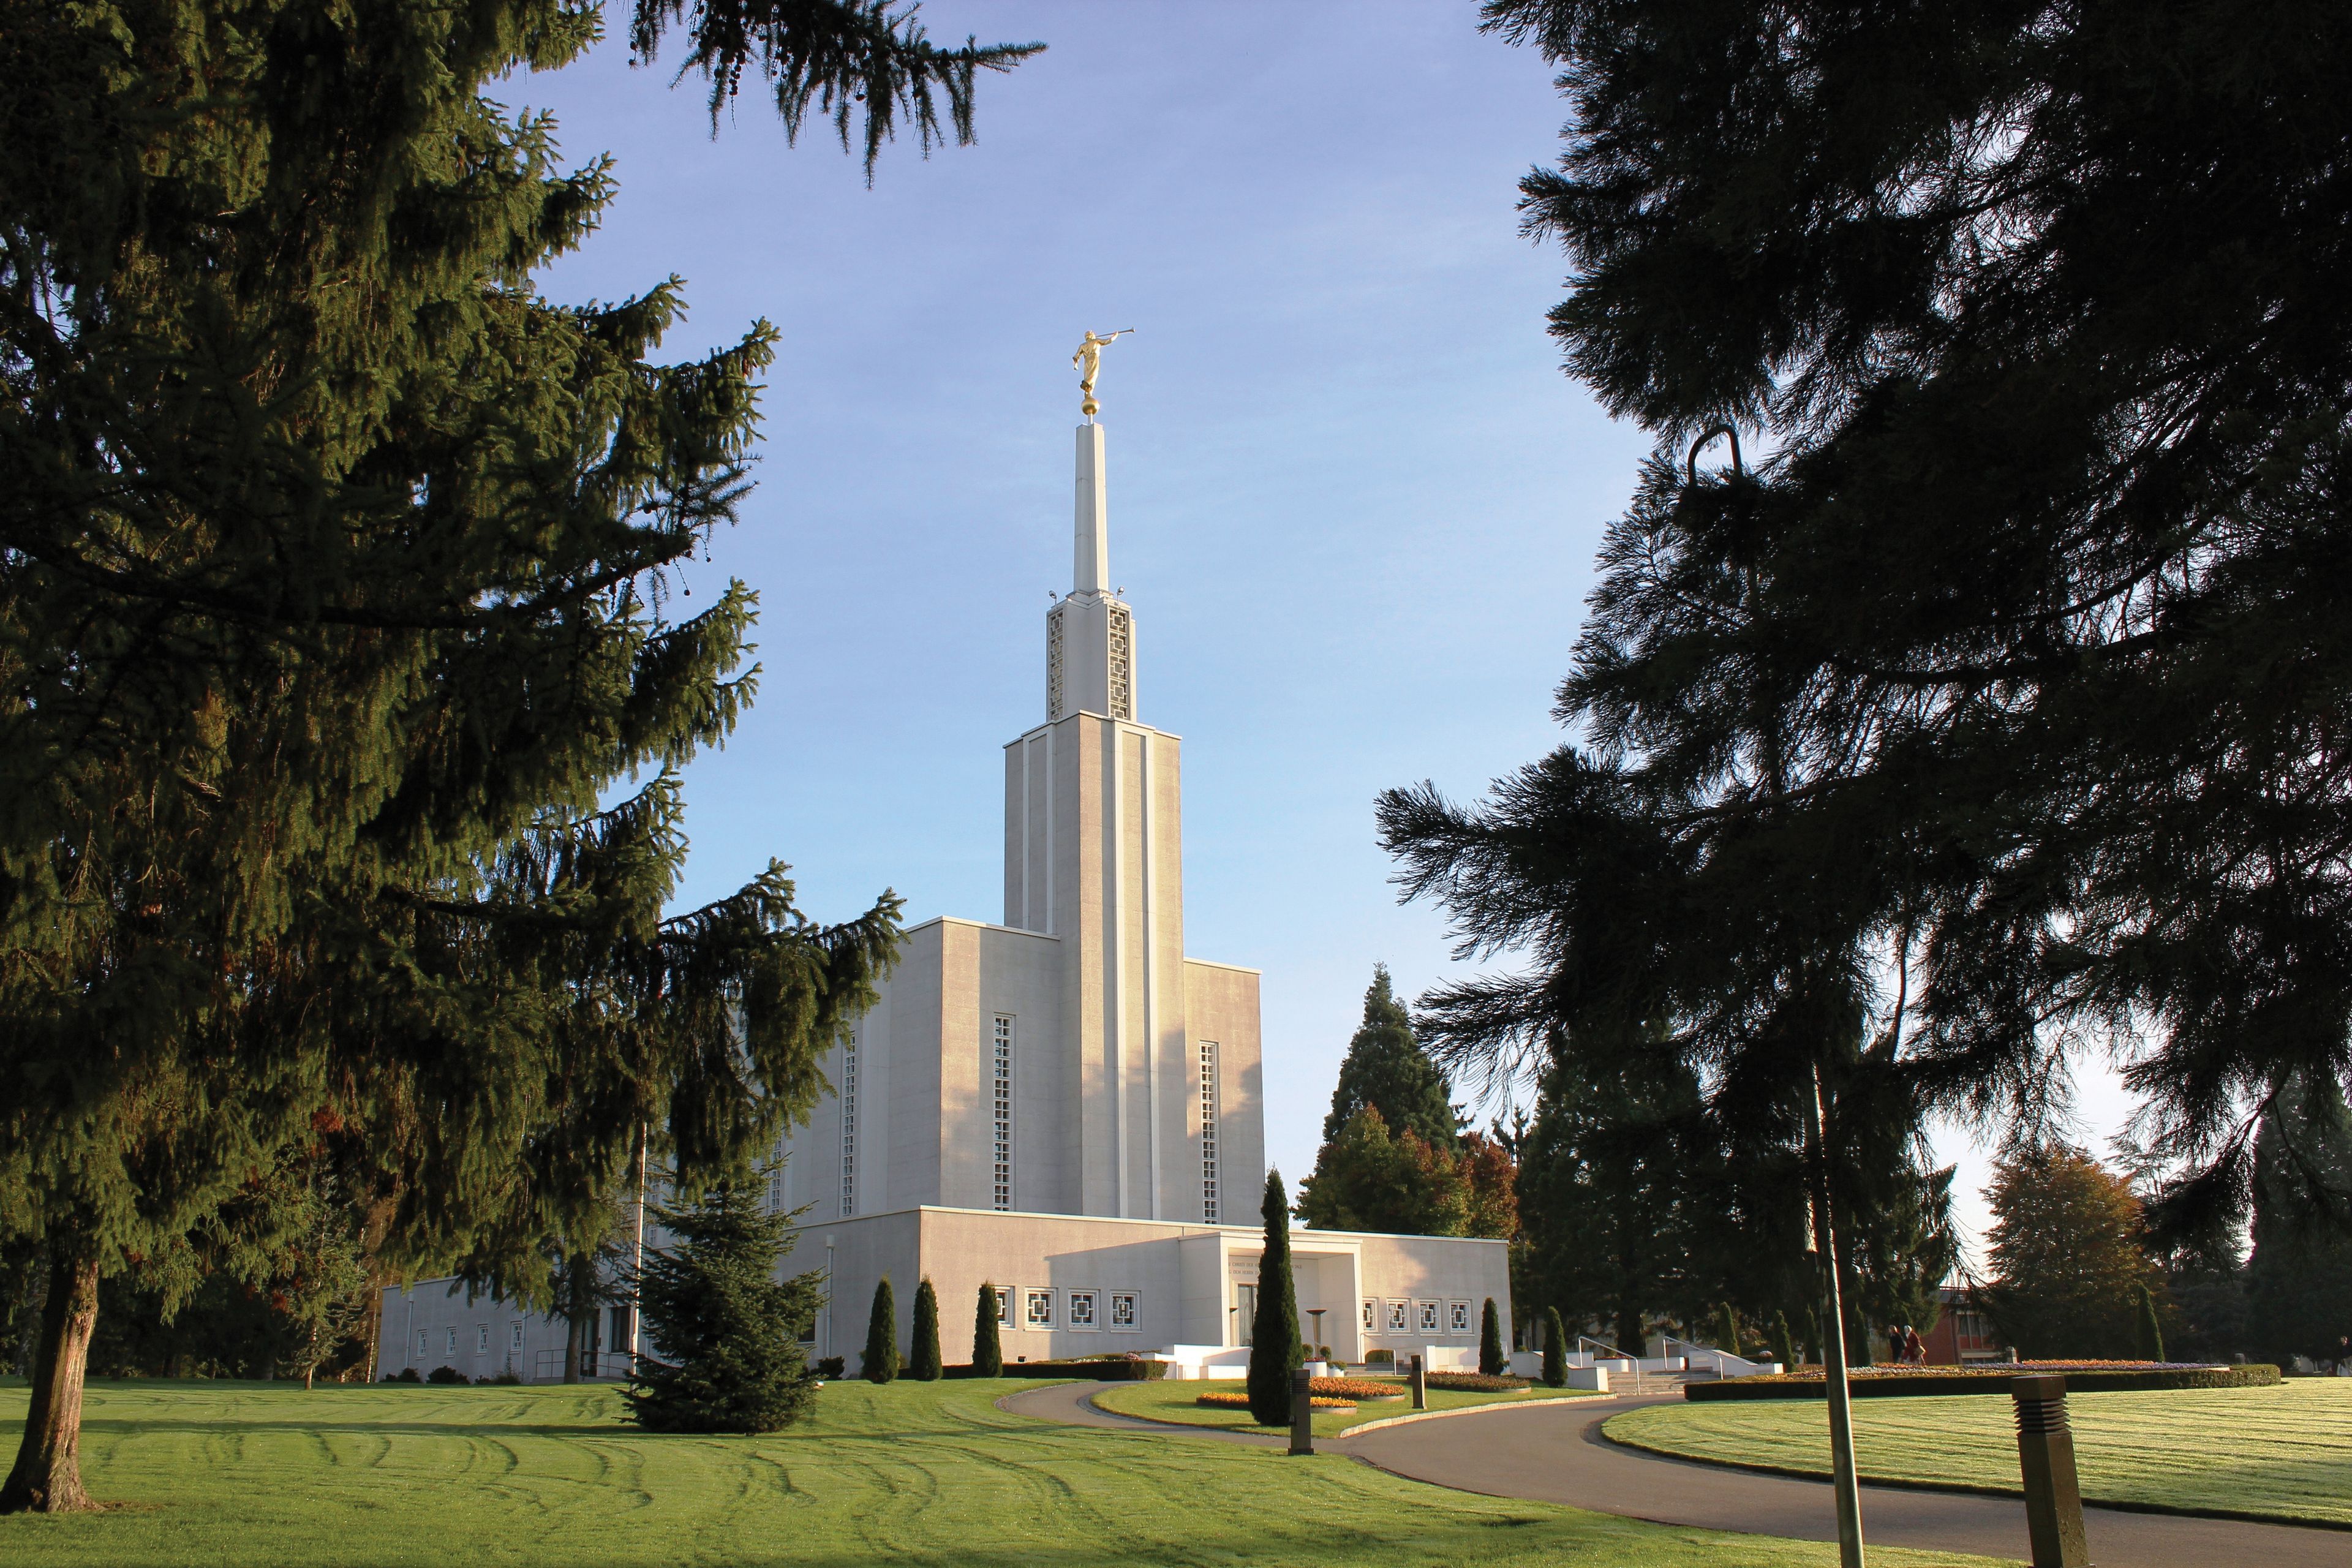 Pine trees frame a view of the Bern Switzerland Temple.